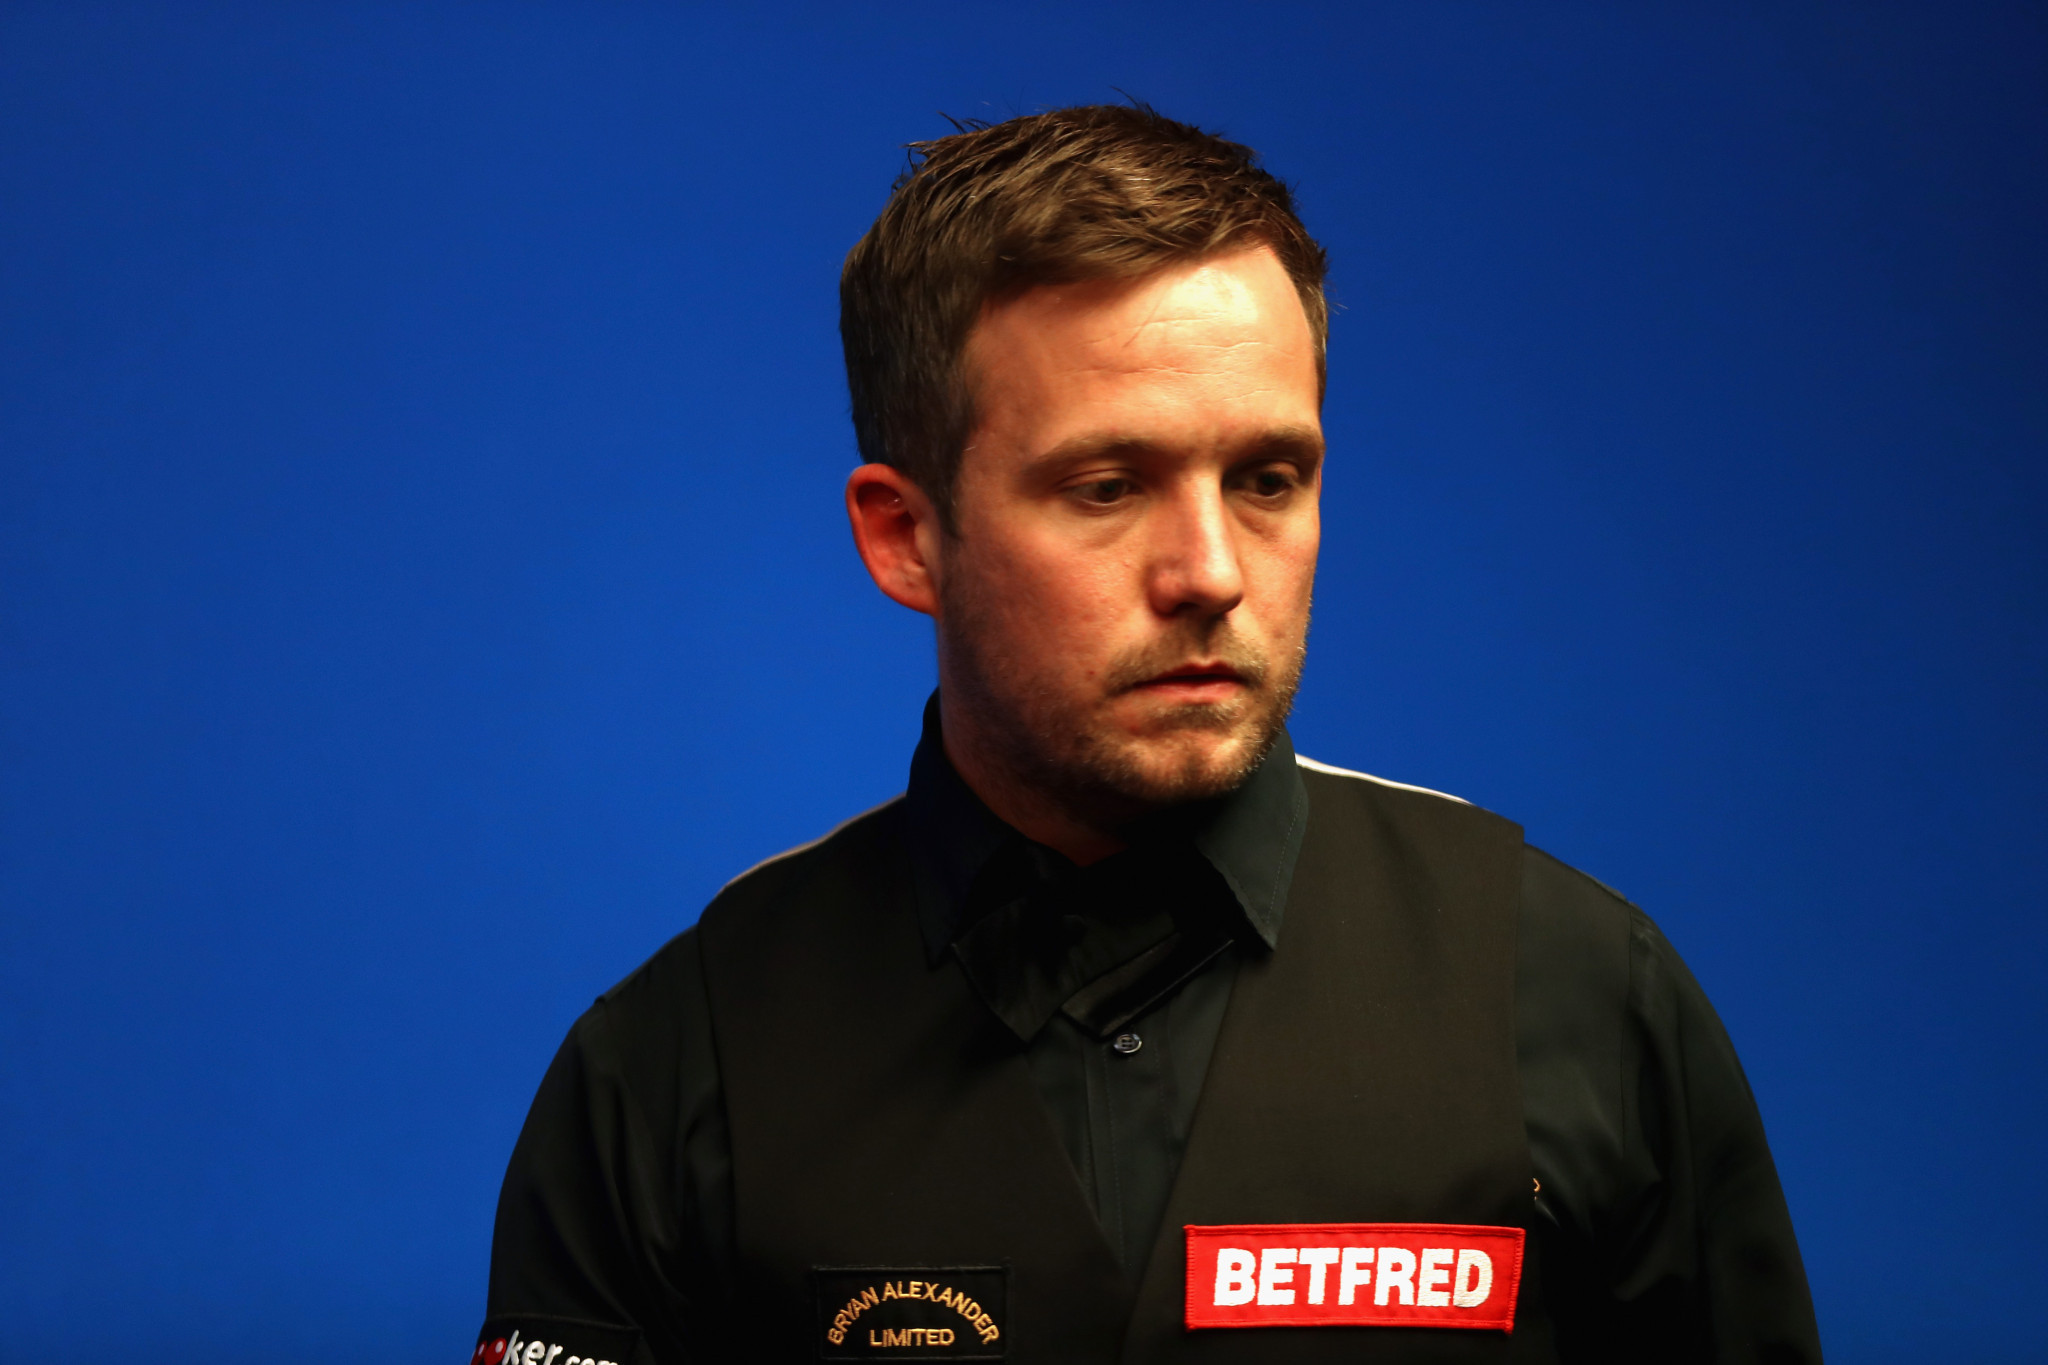 Jones suspended from World Snooker Tour after allegations of match-fixing